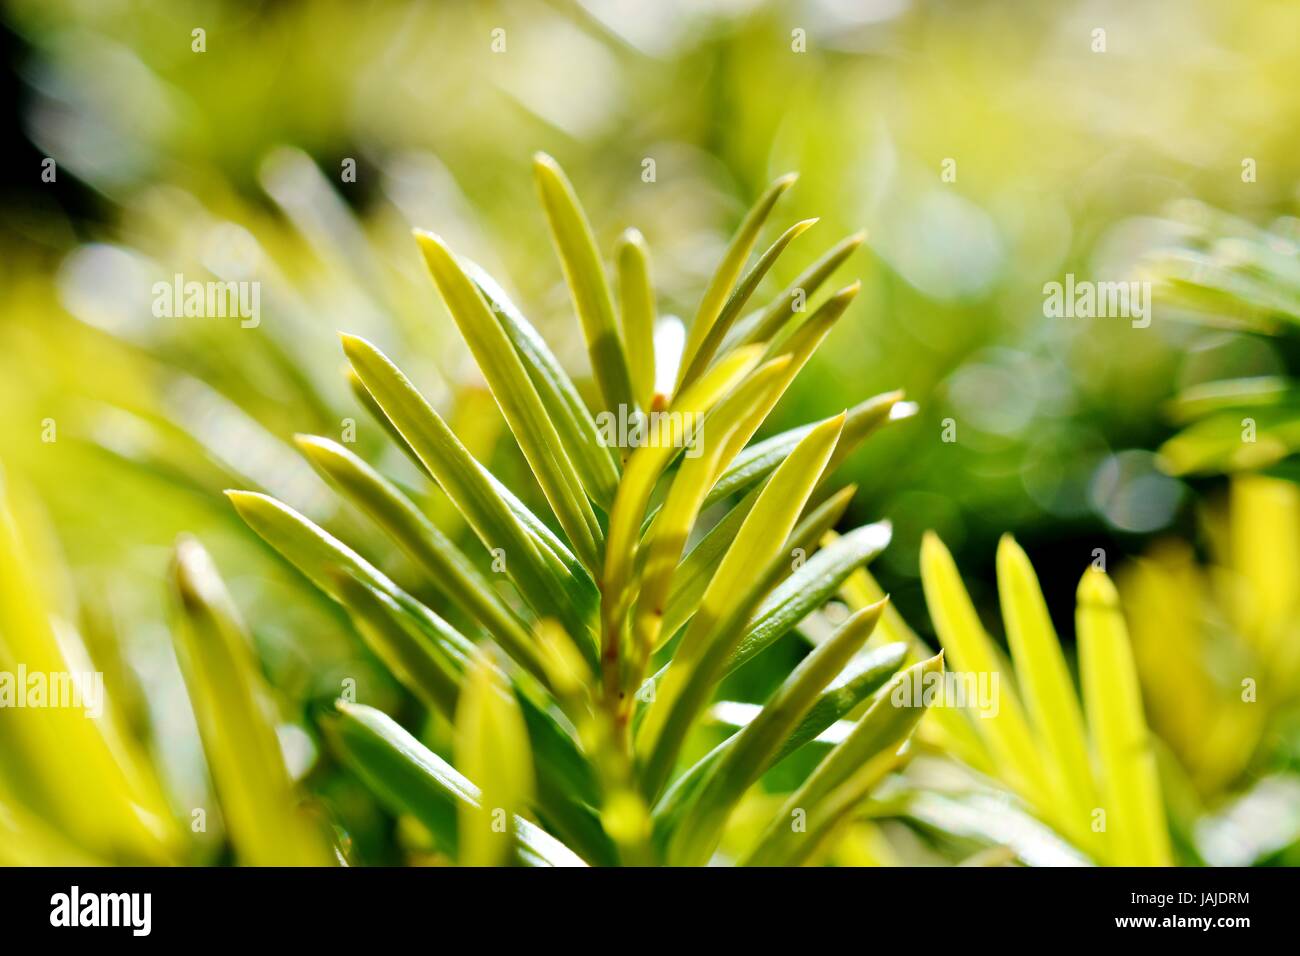 Yew Tree Taxus Baccata Close Up Stock Photos & Yew Tree Taxus Baccata ...